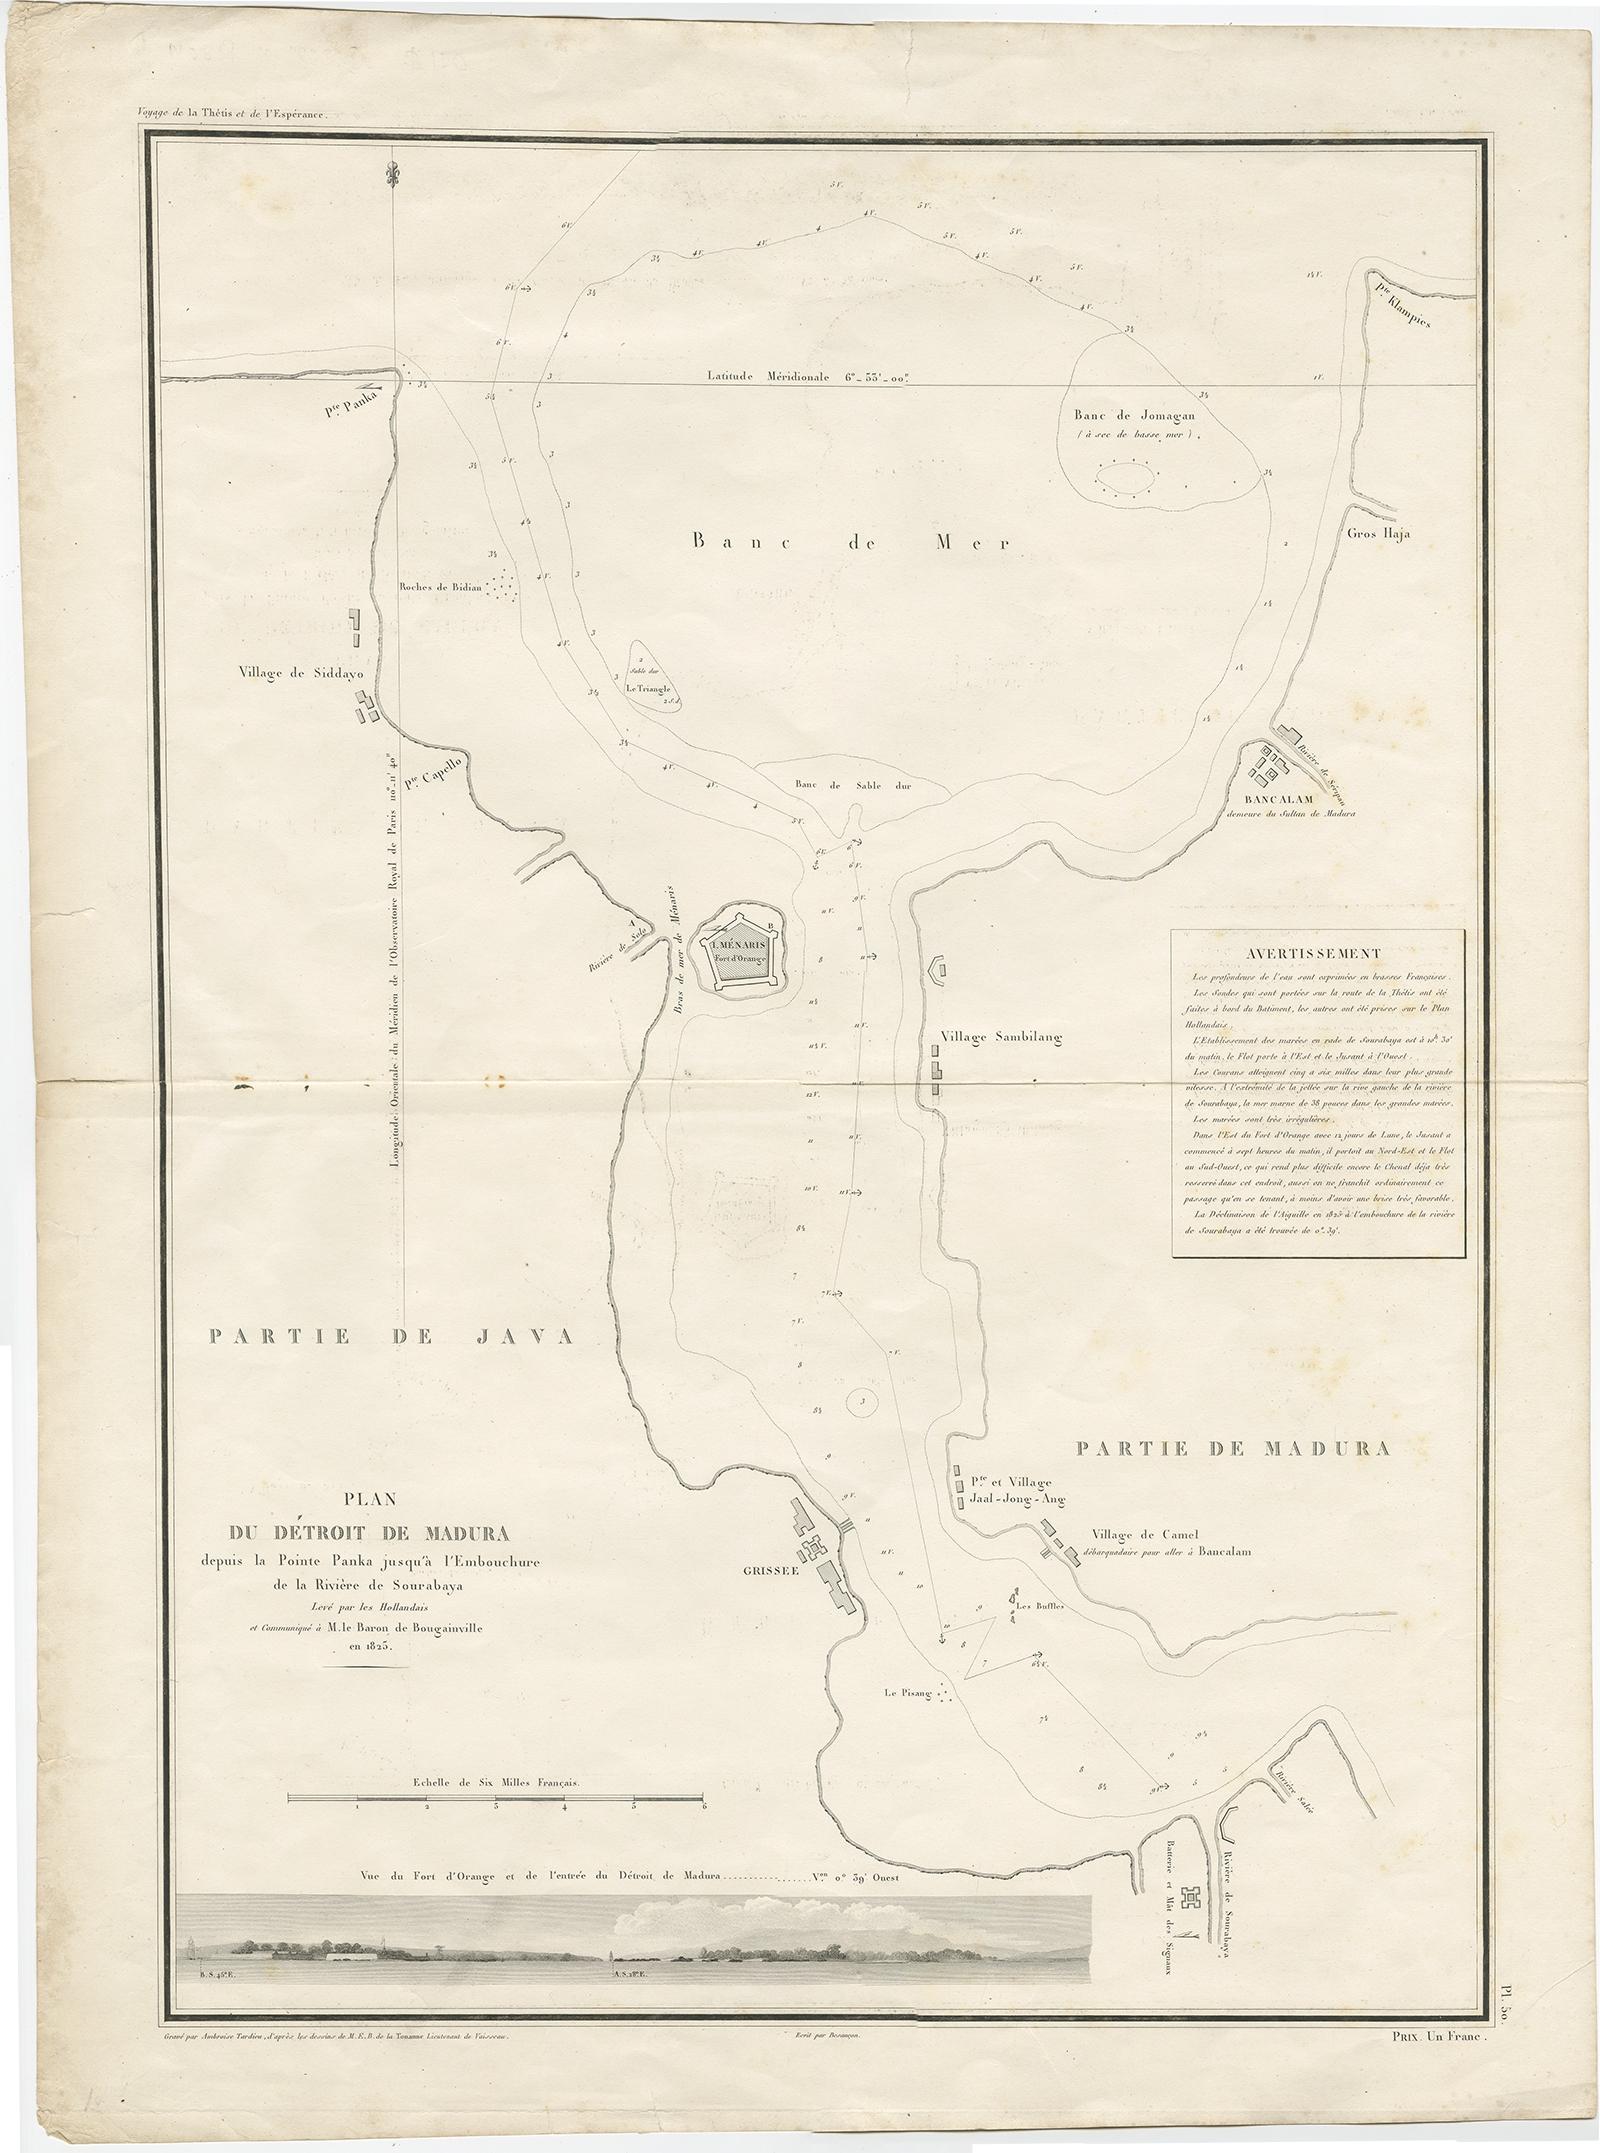 Antique map titled 'Plan du Détroit de Madura'. 

Detailed map of the Madura Strait in Indonesia. The eastern part of the island Java with the city of Gresik and the western part of Pulau Madura with the city Bangkalam. In the lower part of the